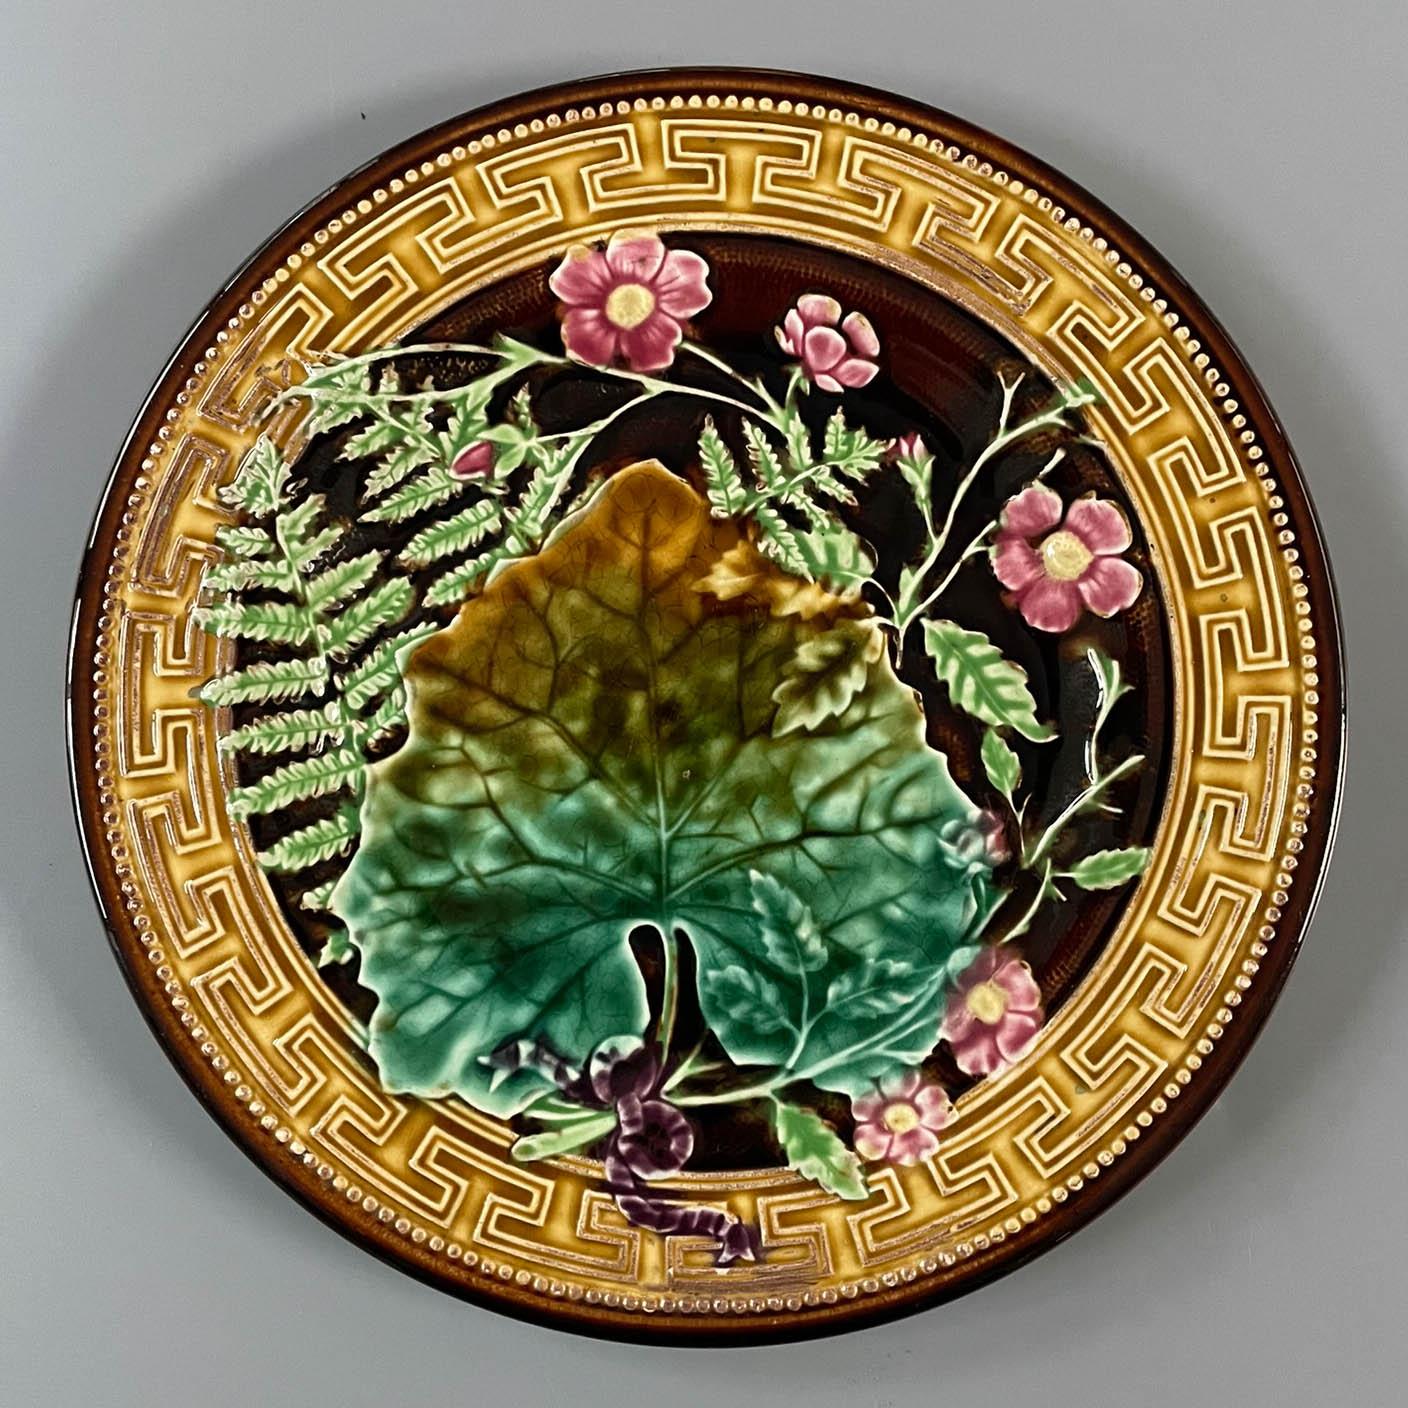 A 19th Century French Majolica glazed ceramic plate by H. B. Boulanger Choisy-le-Roi. Pattern of ferns and pink flowers beneath a large leaf, tied with a purple bow. Vivid shades of green, yellow, and pink on brown ground with ochre Greek key design